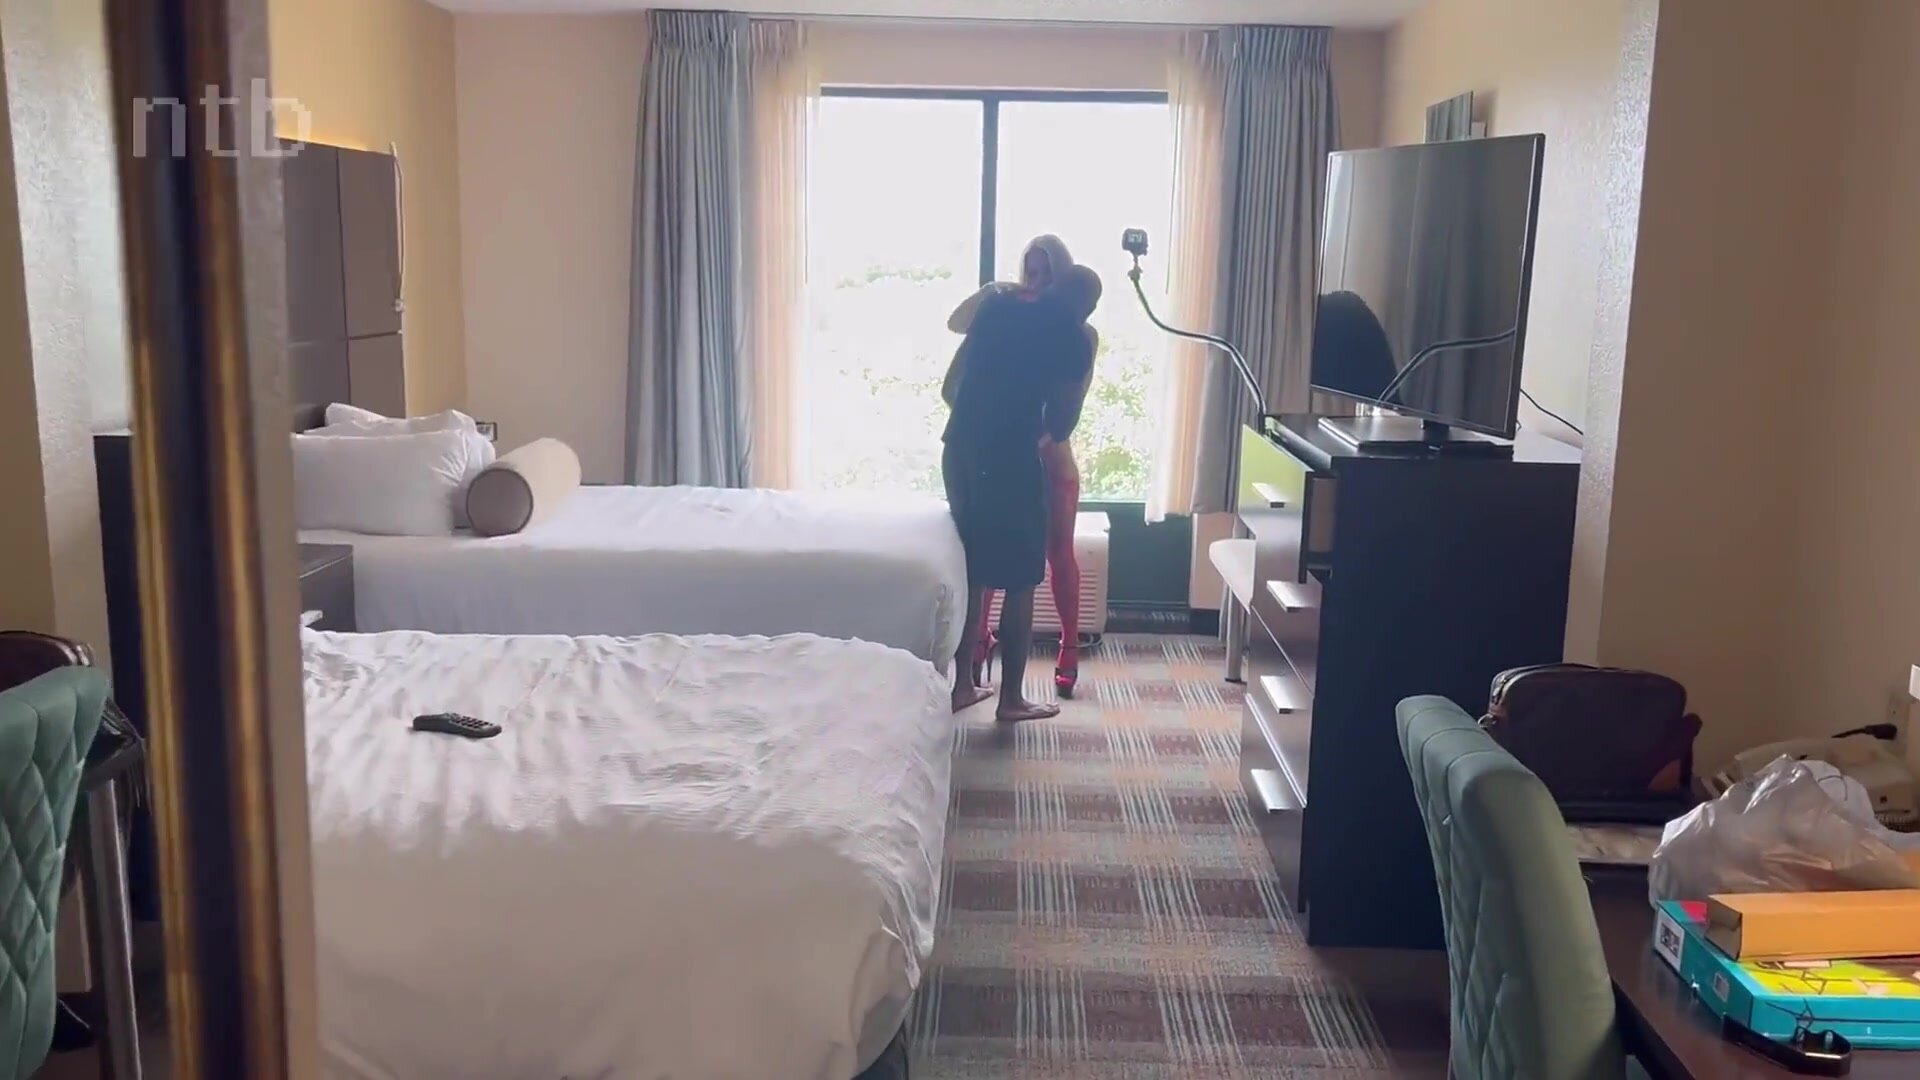 Gorgeous blonde wife meets black bull in hotel